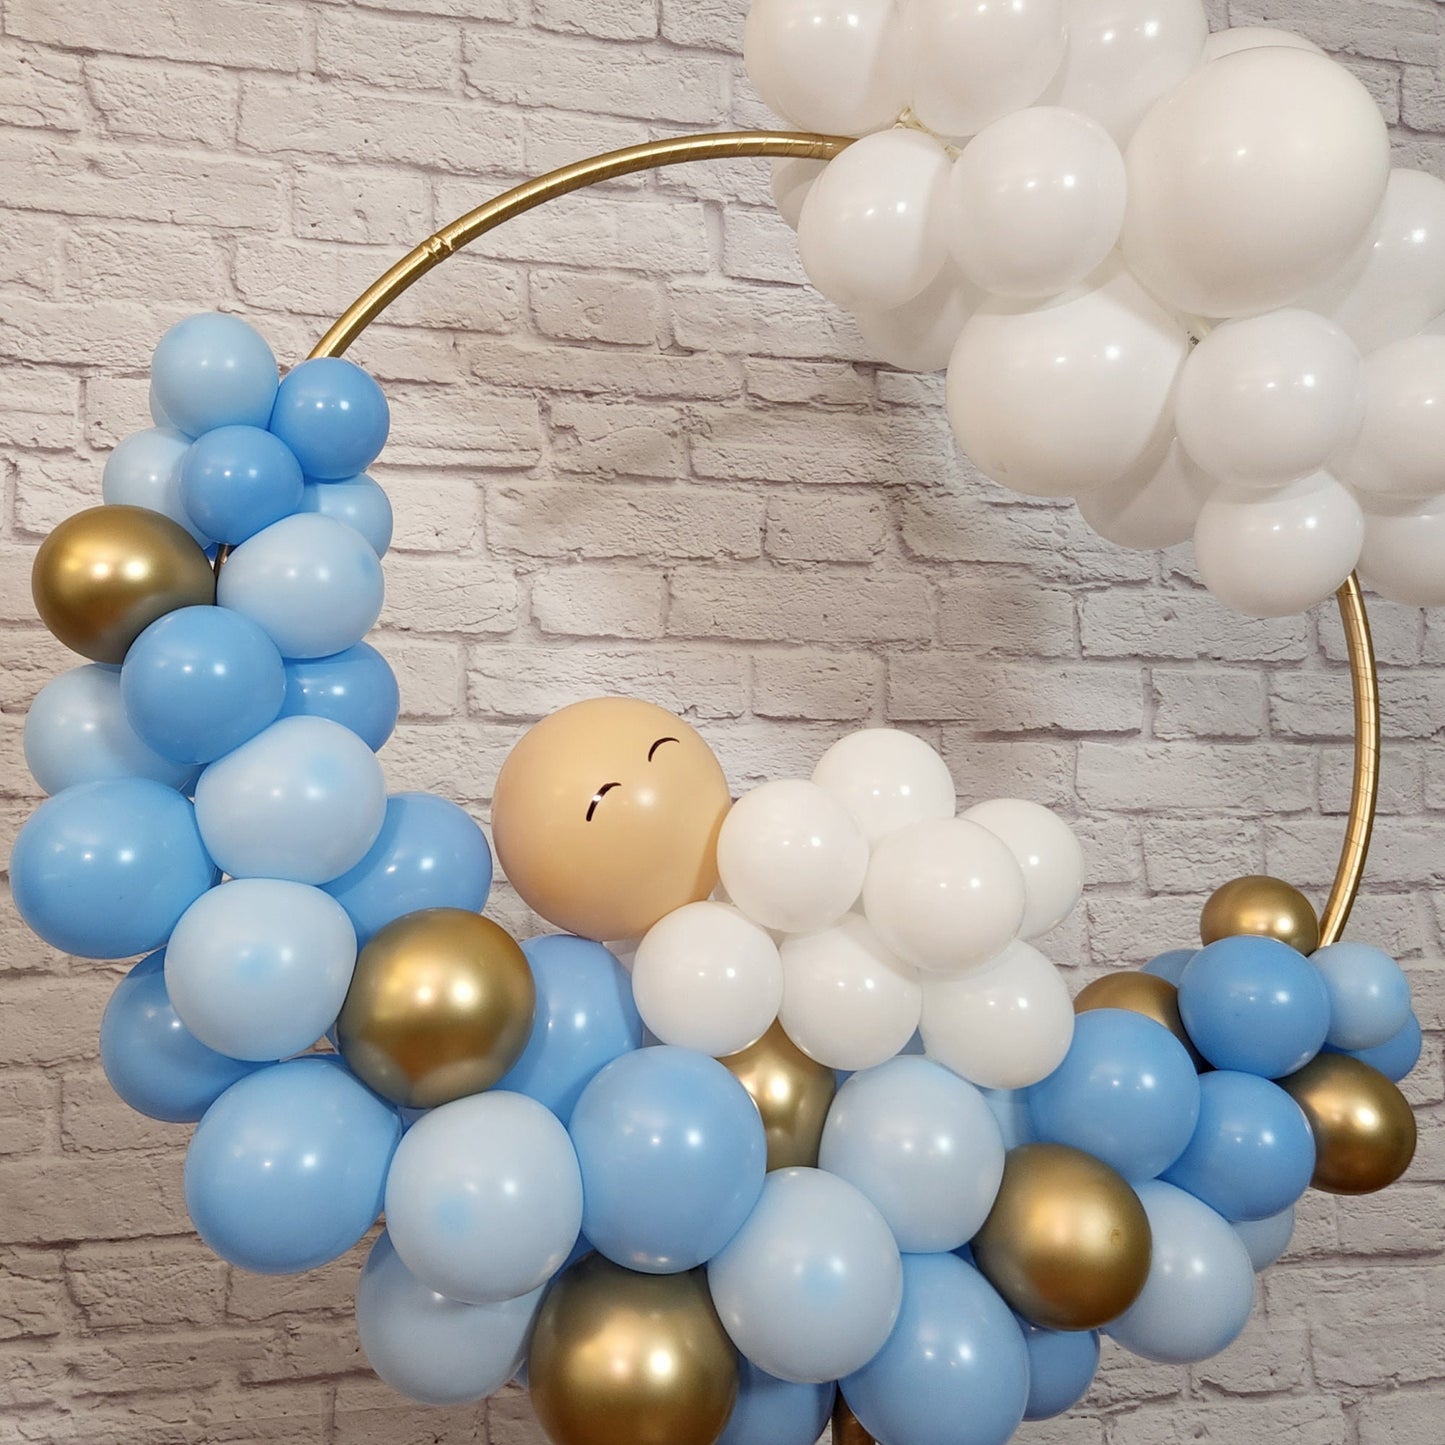 Over the Moon Baby Shower Circle Balloon Arch Tutorial and Plans | Digital Balloon Recipe